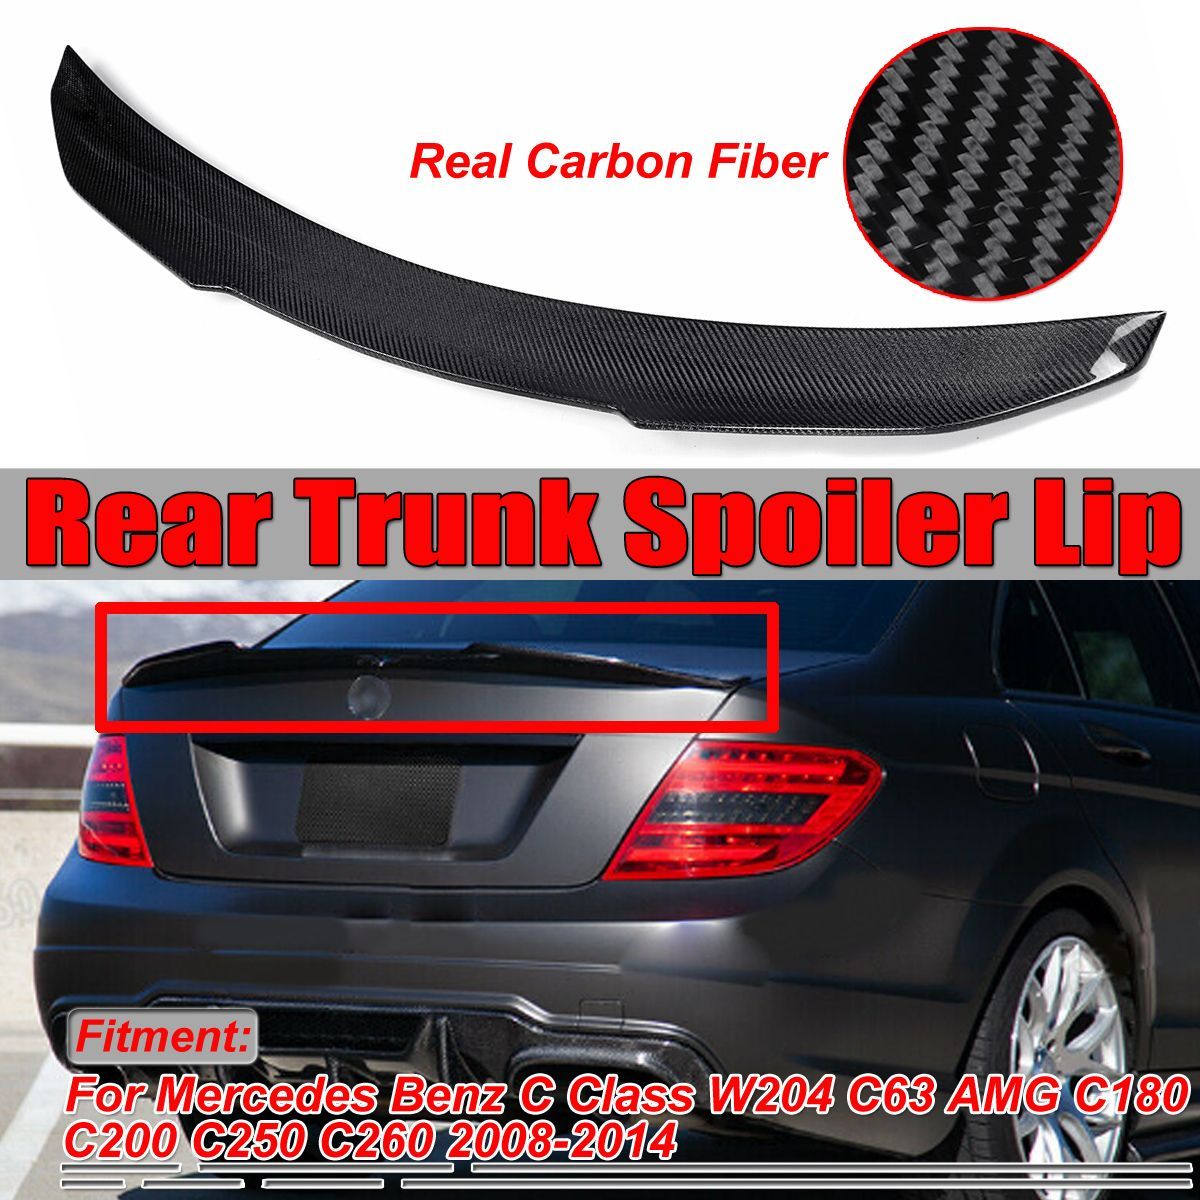 Car-Real-Carbon-Fiber-Board-Rear-Spoiler-Wing-For-Mercedes-Benz-C-Class-W204-C63-AMG-2008-2014-1568876